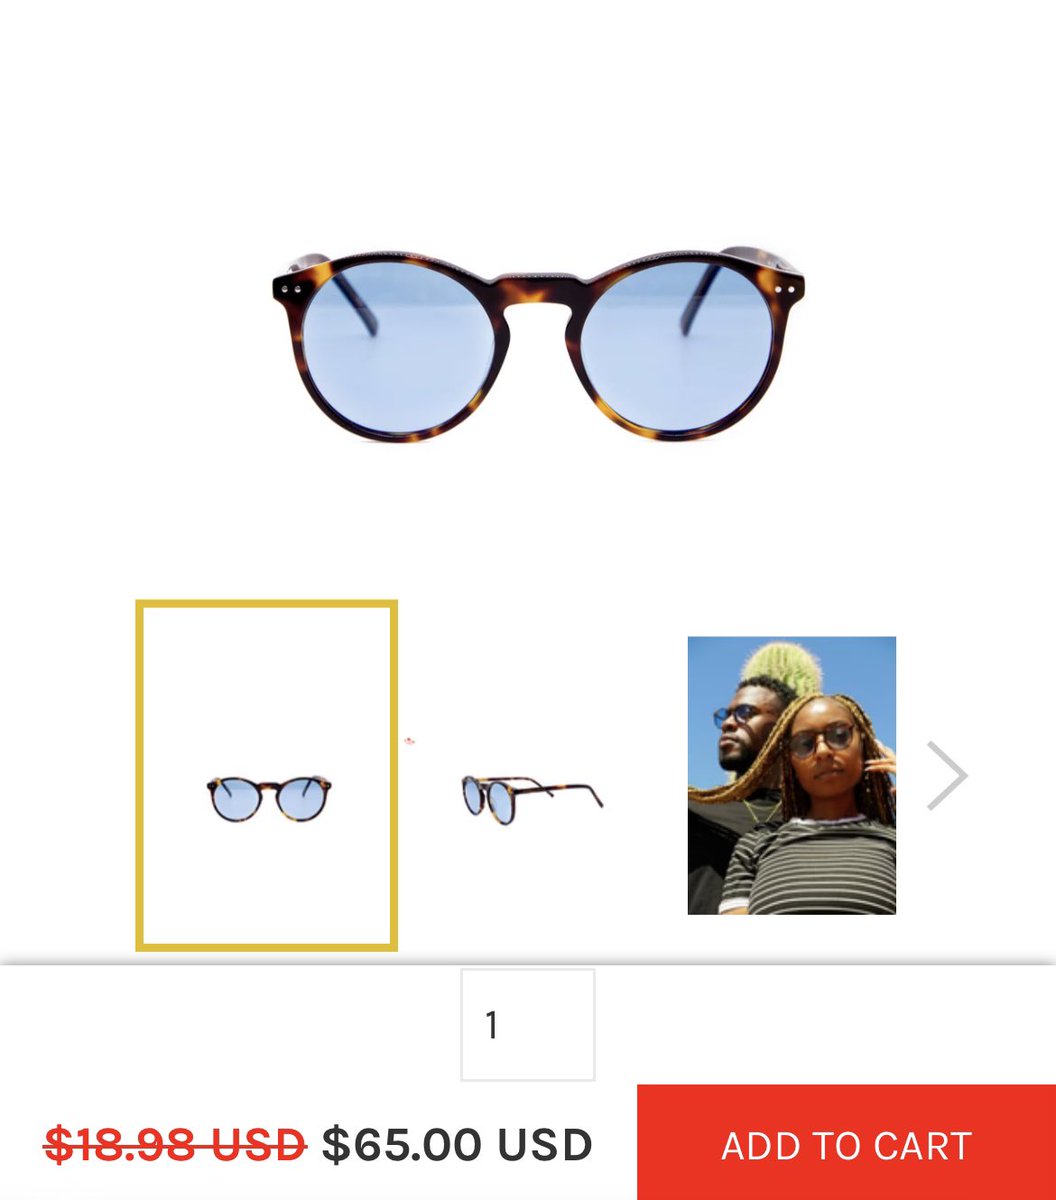 @TheShadySideUp I’ve been waiting for these to come back in stock for MONTHS since i lost my original pair but uh…is your website okay? Something about this just doesn’t sit right with me 🤔🤔🤔 #Sunglasses #shadysideup